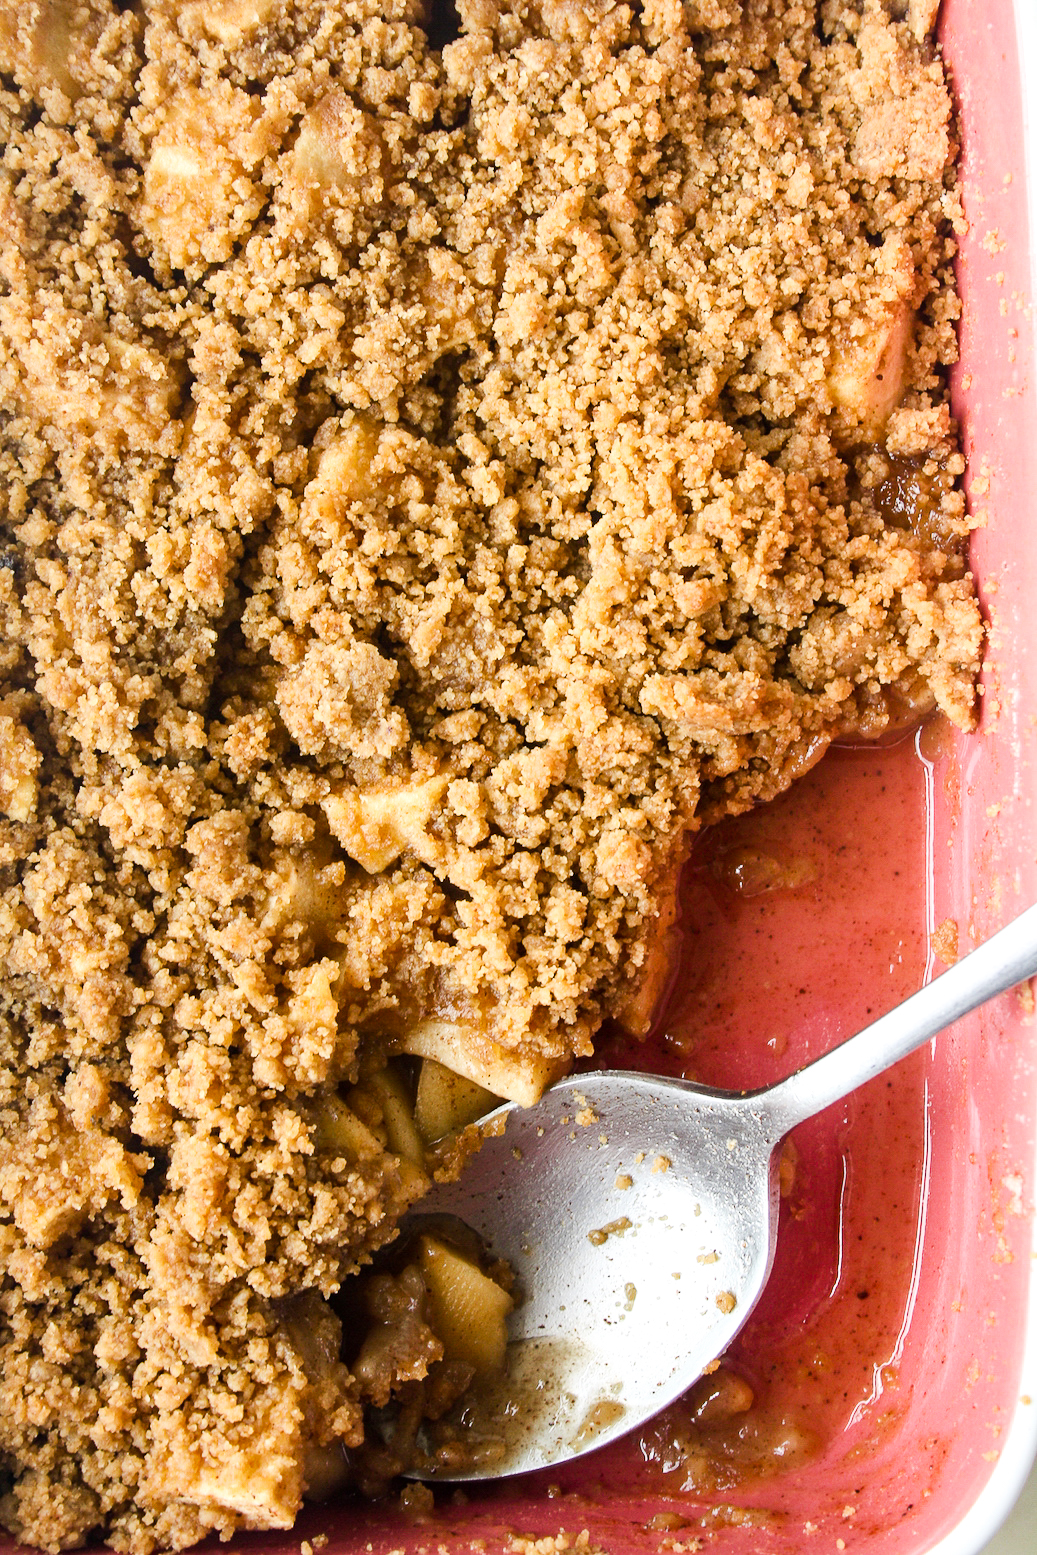 Classic apple crumble with cinnamon and juicy apples!